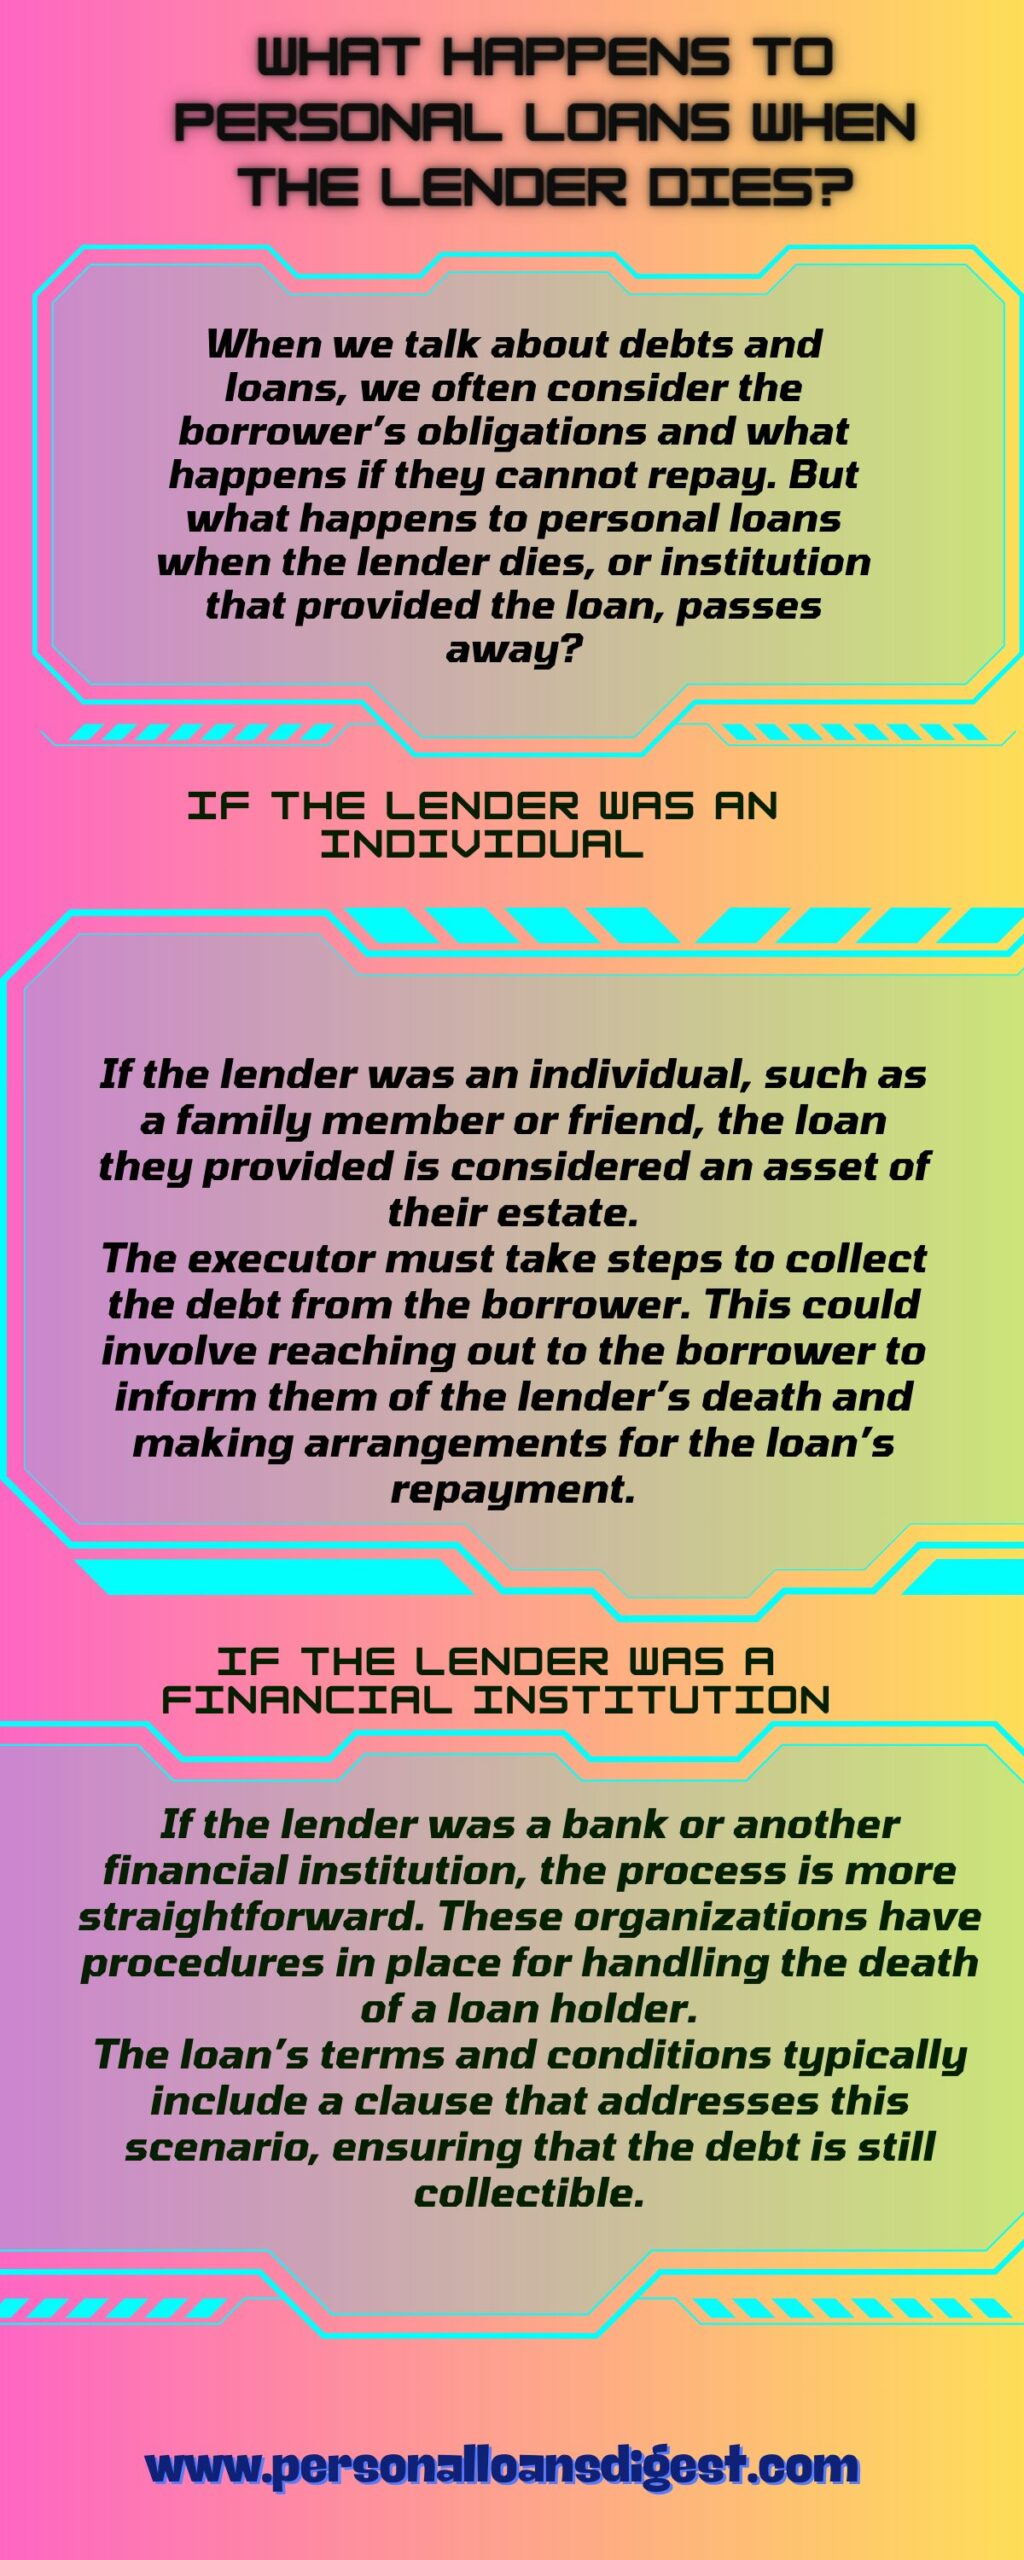 What Happens to Personal Loans When the Lender Dies?